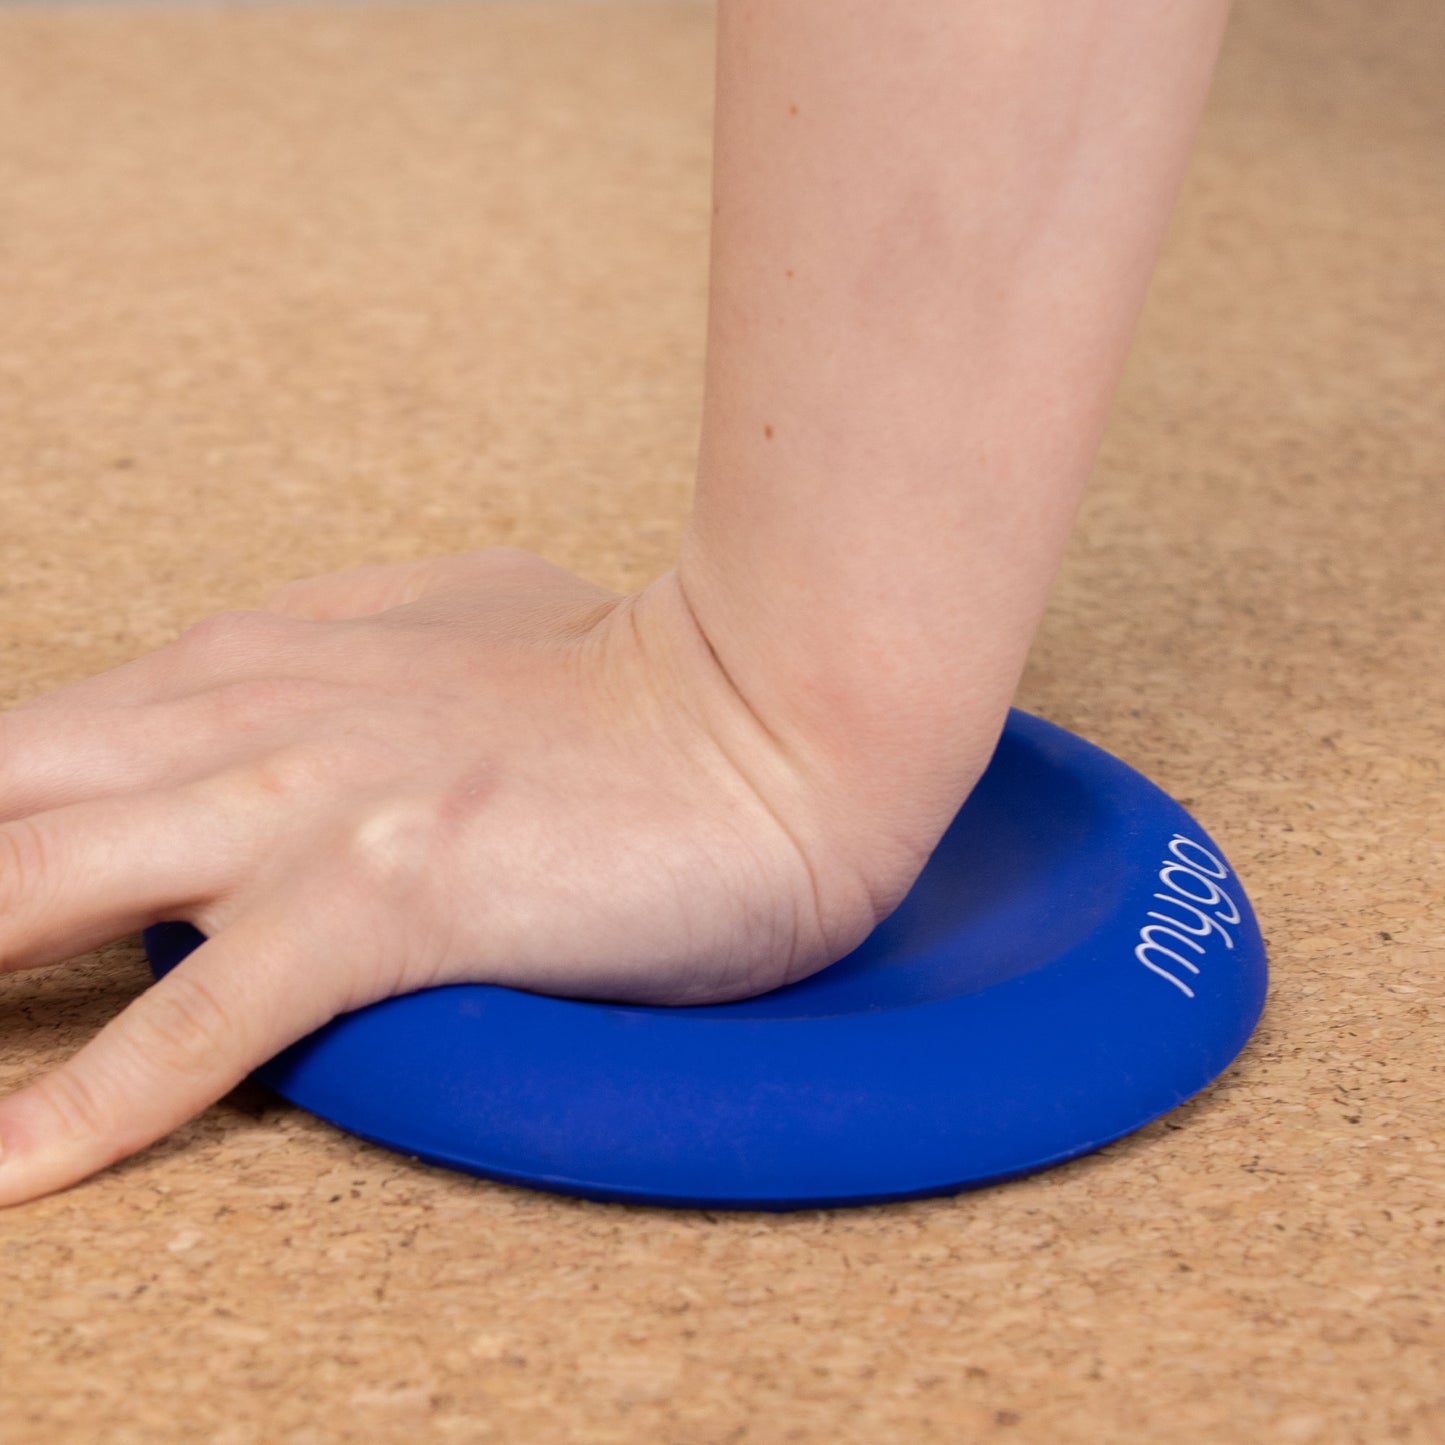 Yoga Support Jelly Pad - Blue